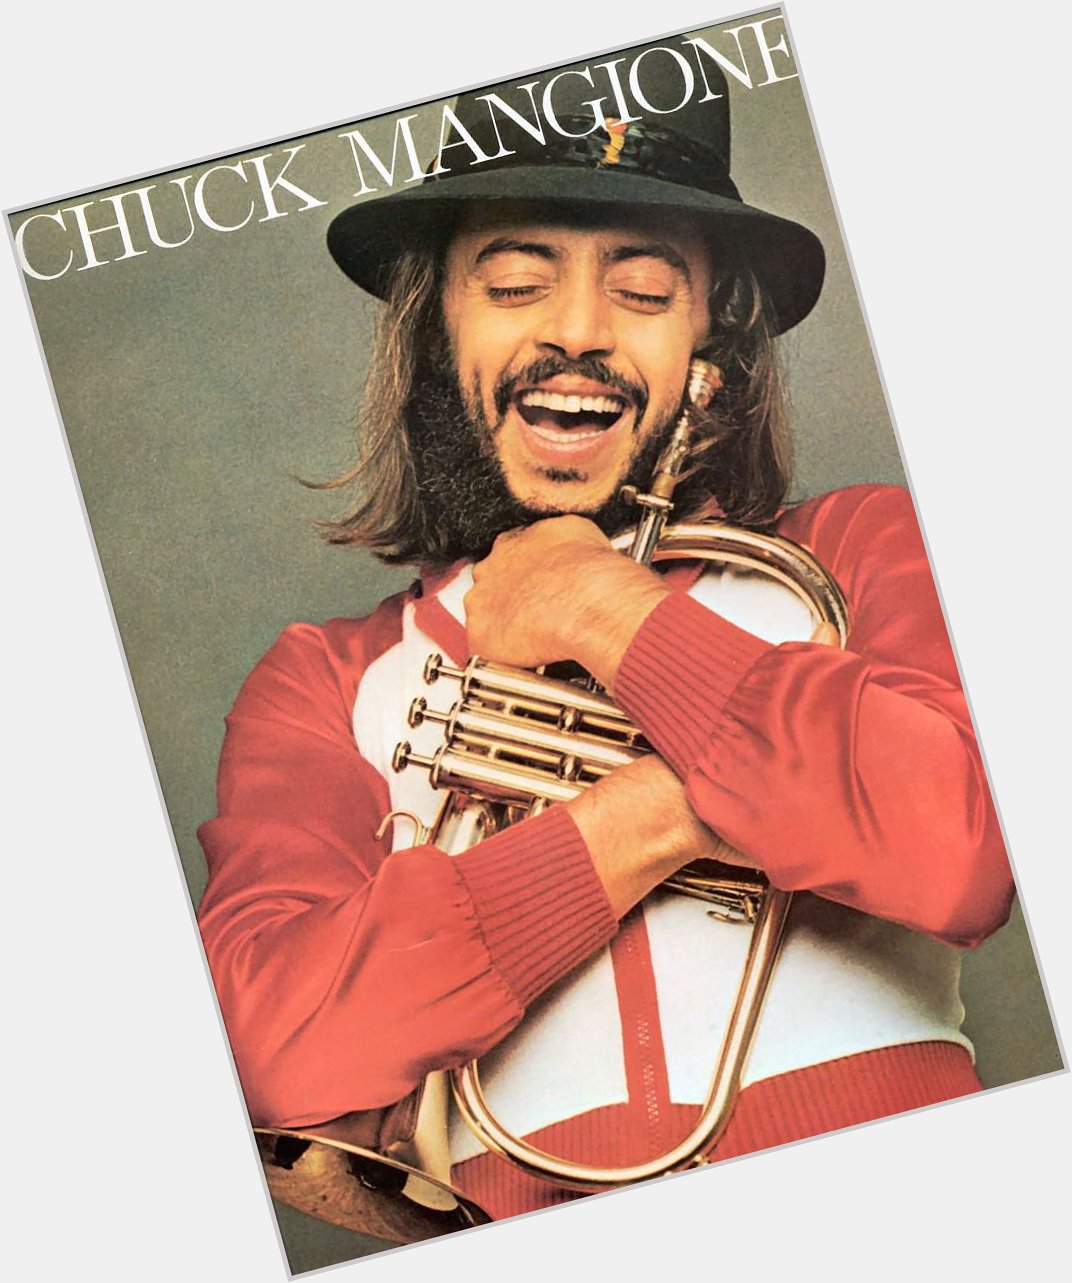 - Music is meant to be a beautiful thing. -
-Happy 82nd Birthday to Chuck Mangione- 